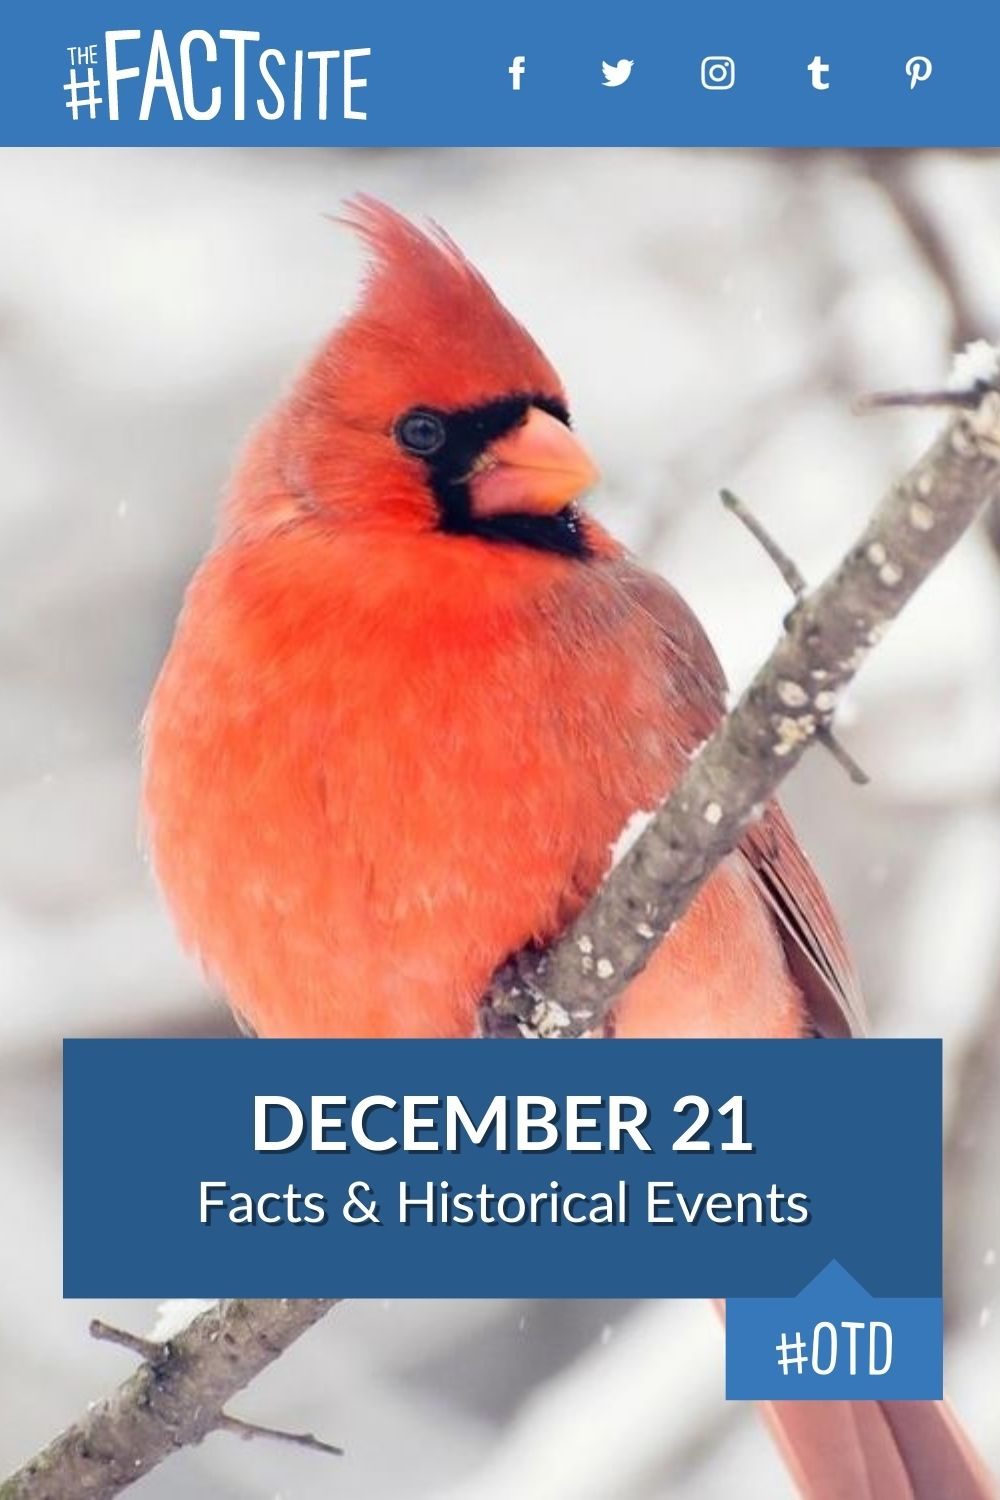 Facts & Historic Events That Happened on December 21